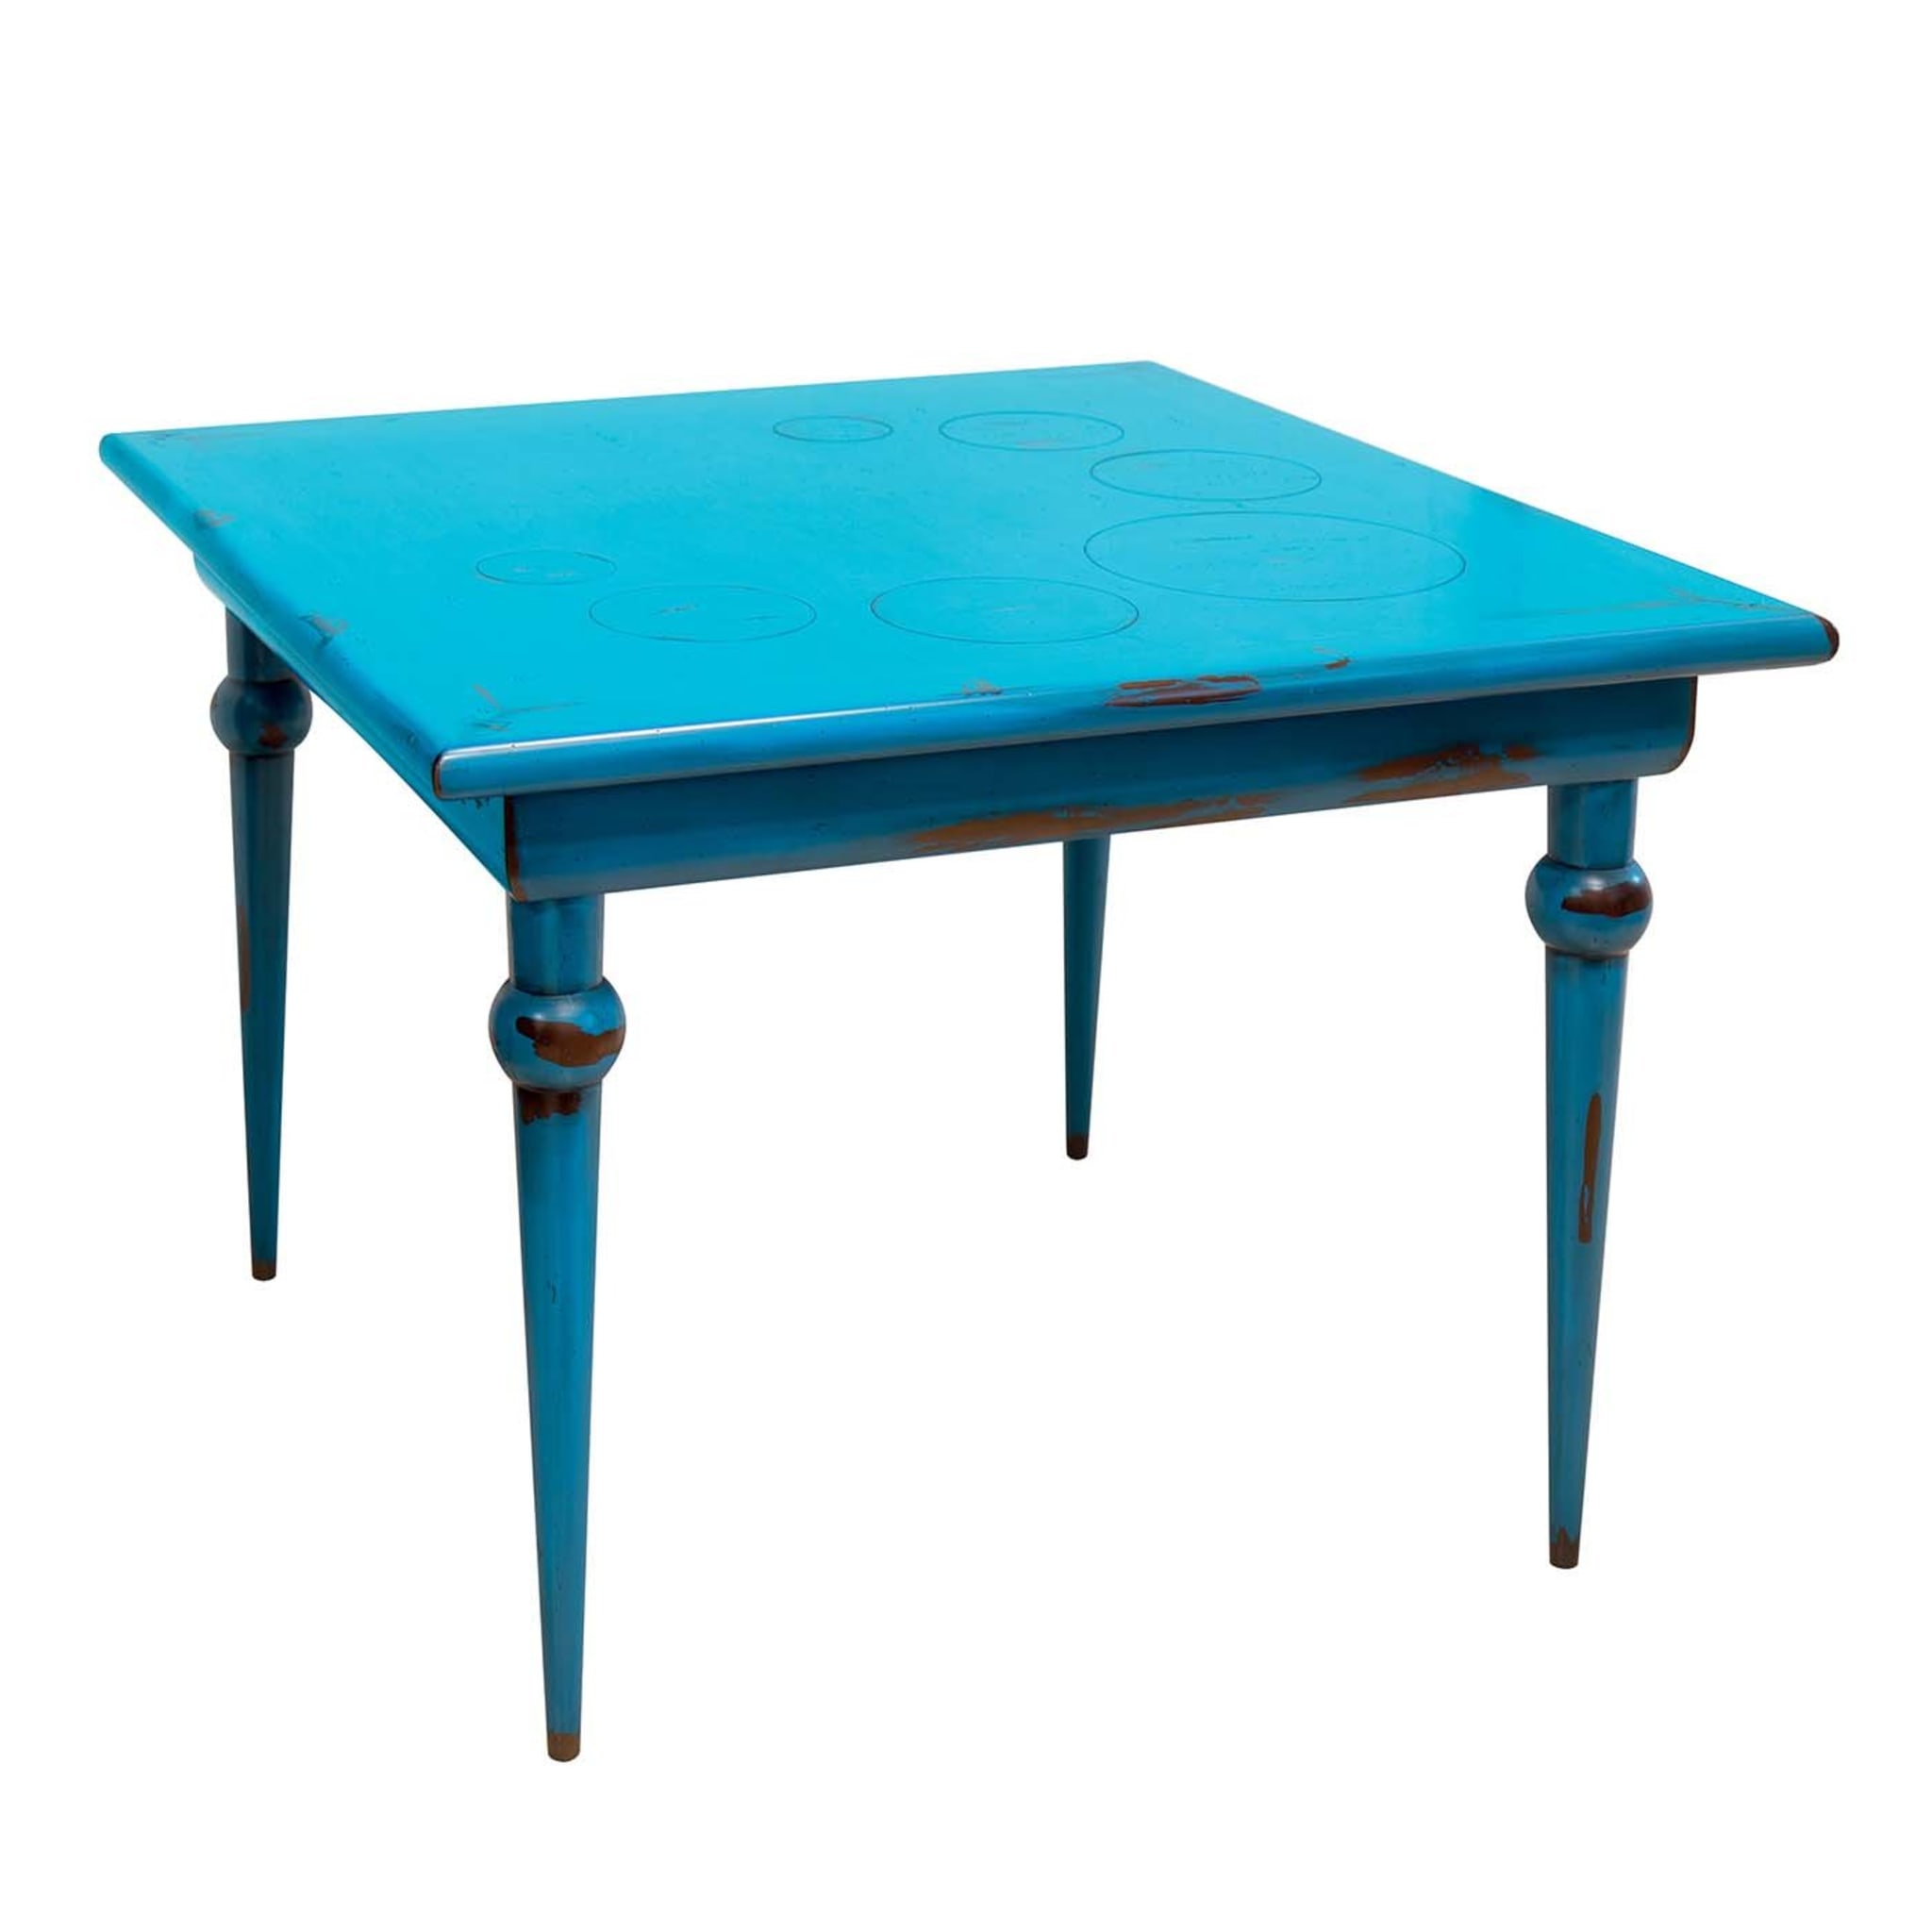 Le Bolle Blue Square Table - Main view